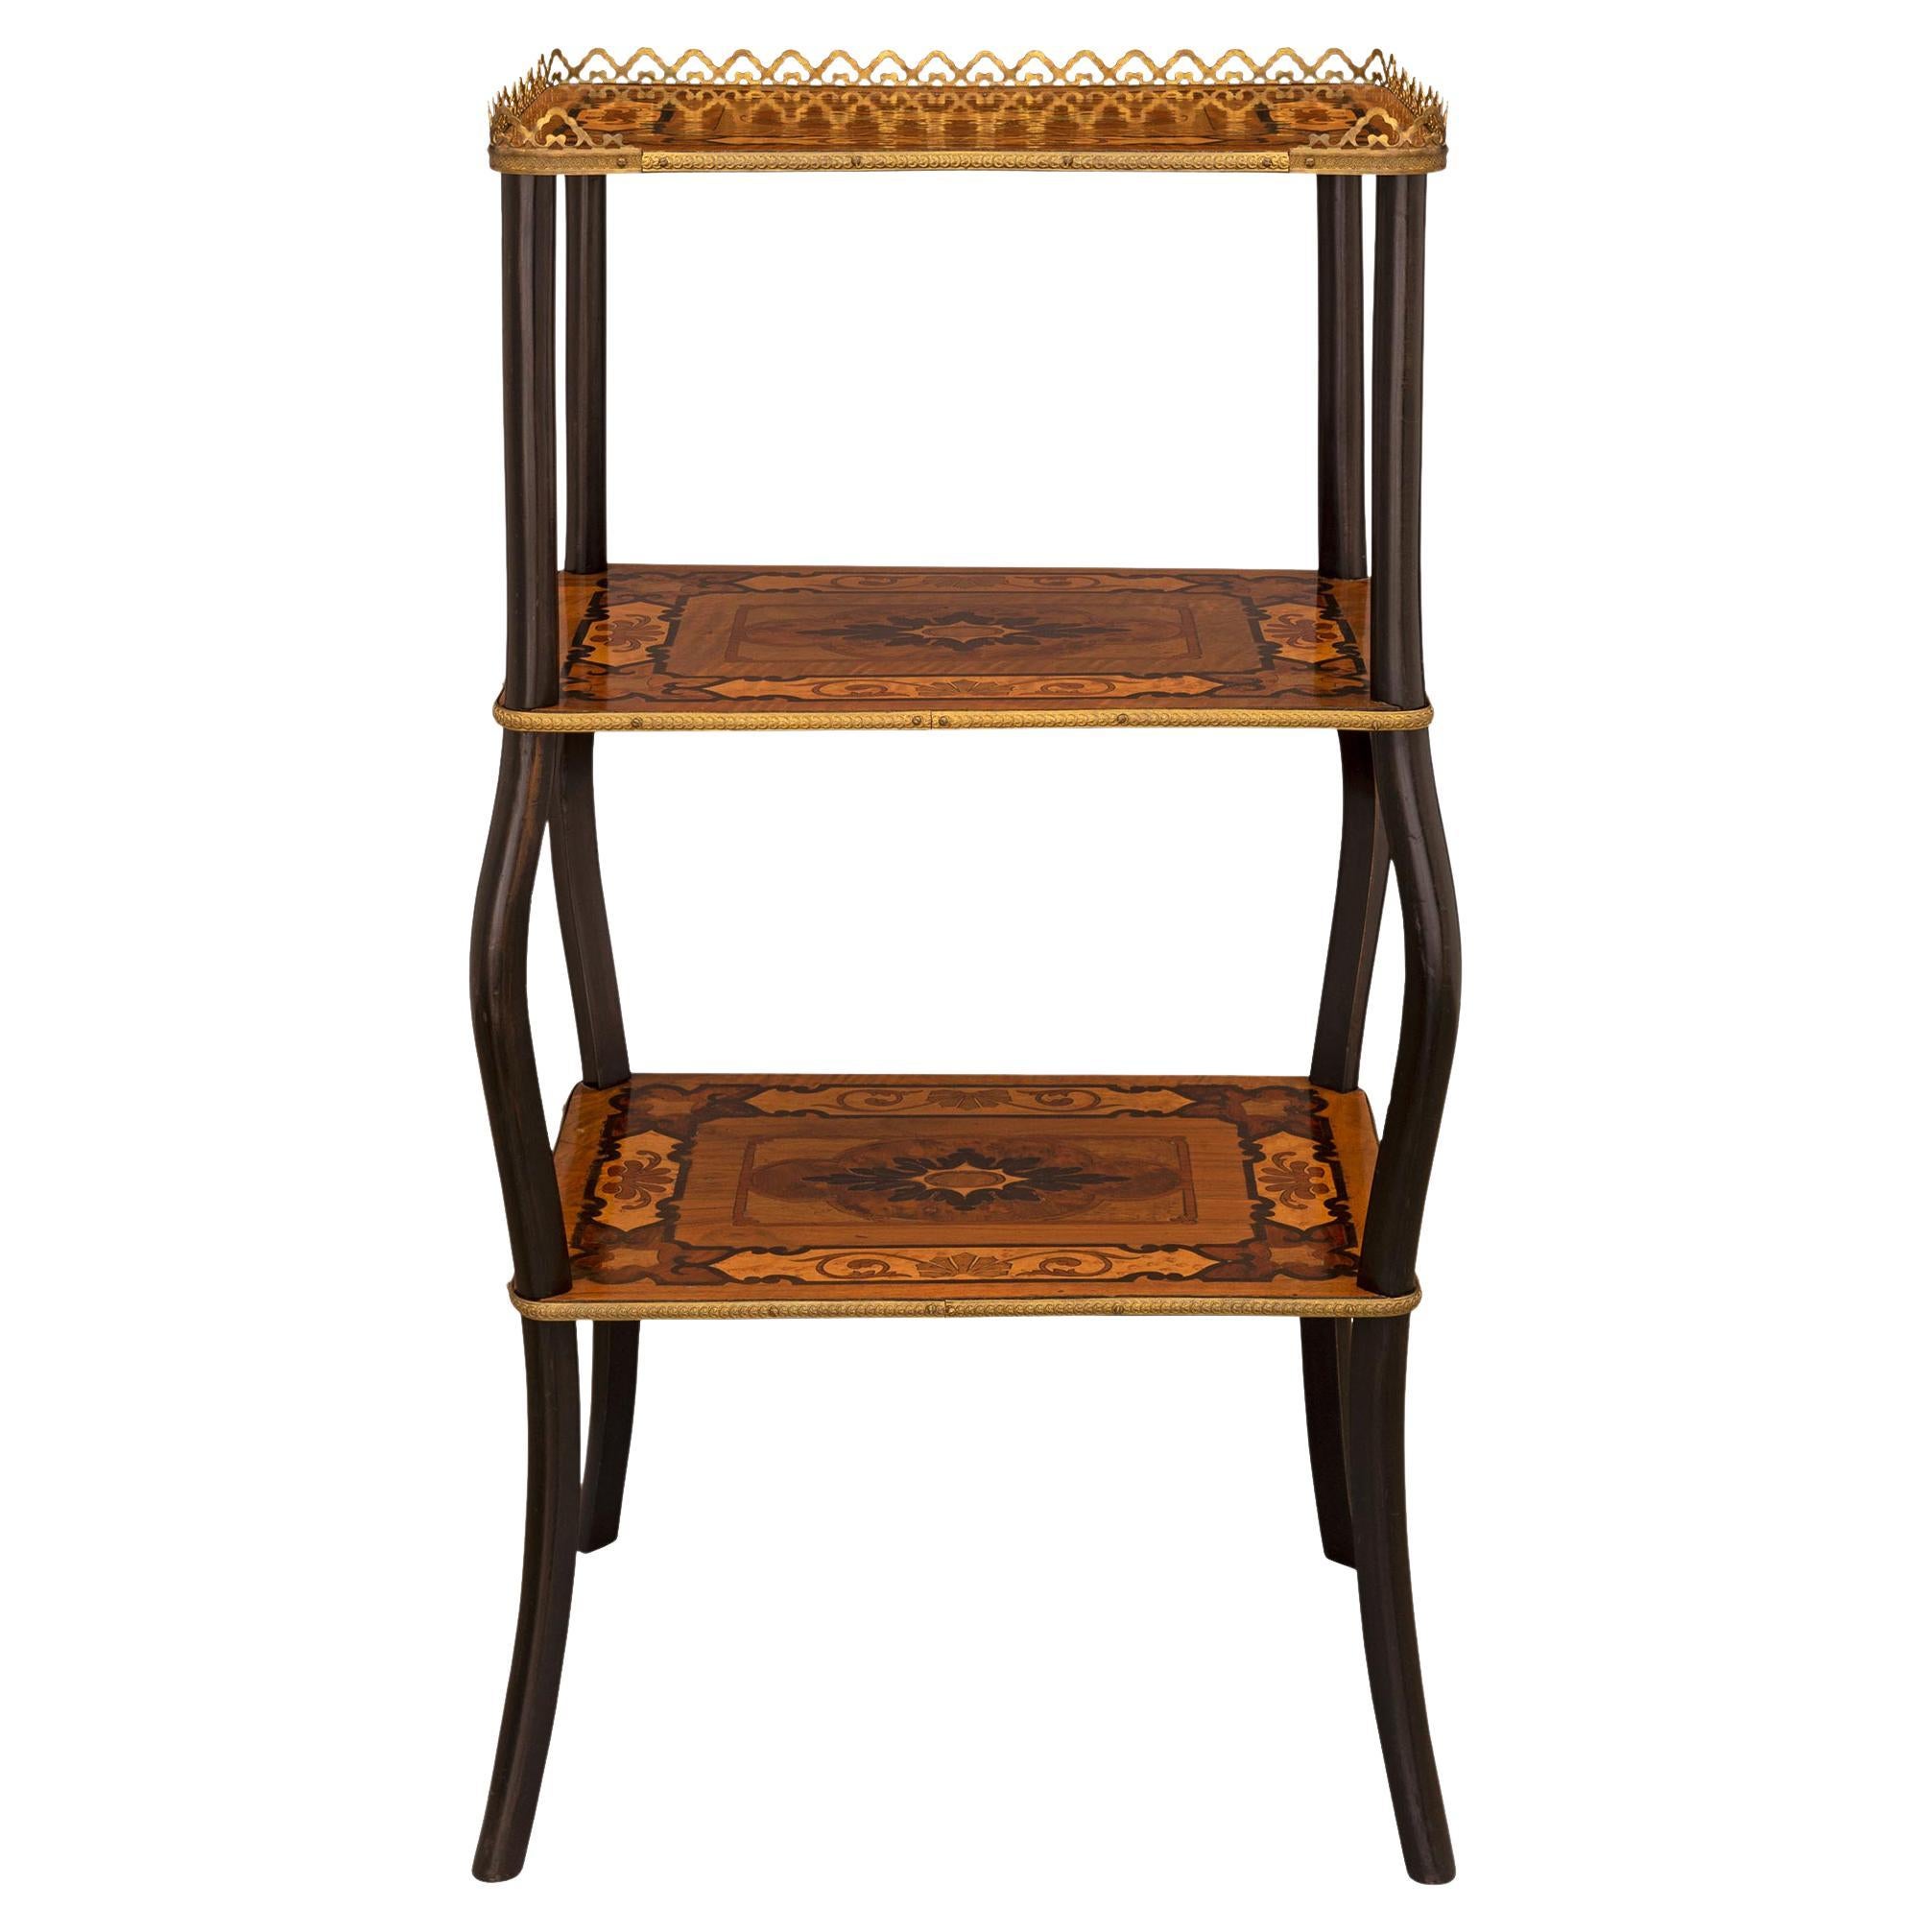 French 19th Century Napoleon III Period Ebony, Exotic Wood, & Ormolu Side Table For Sale